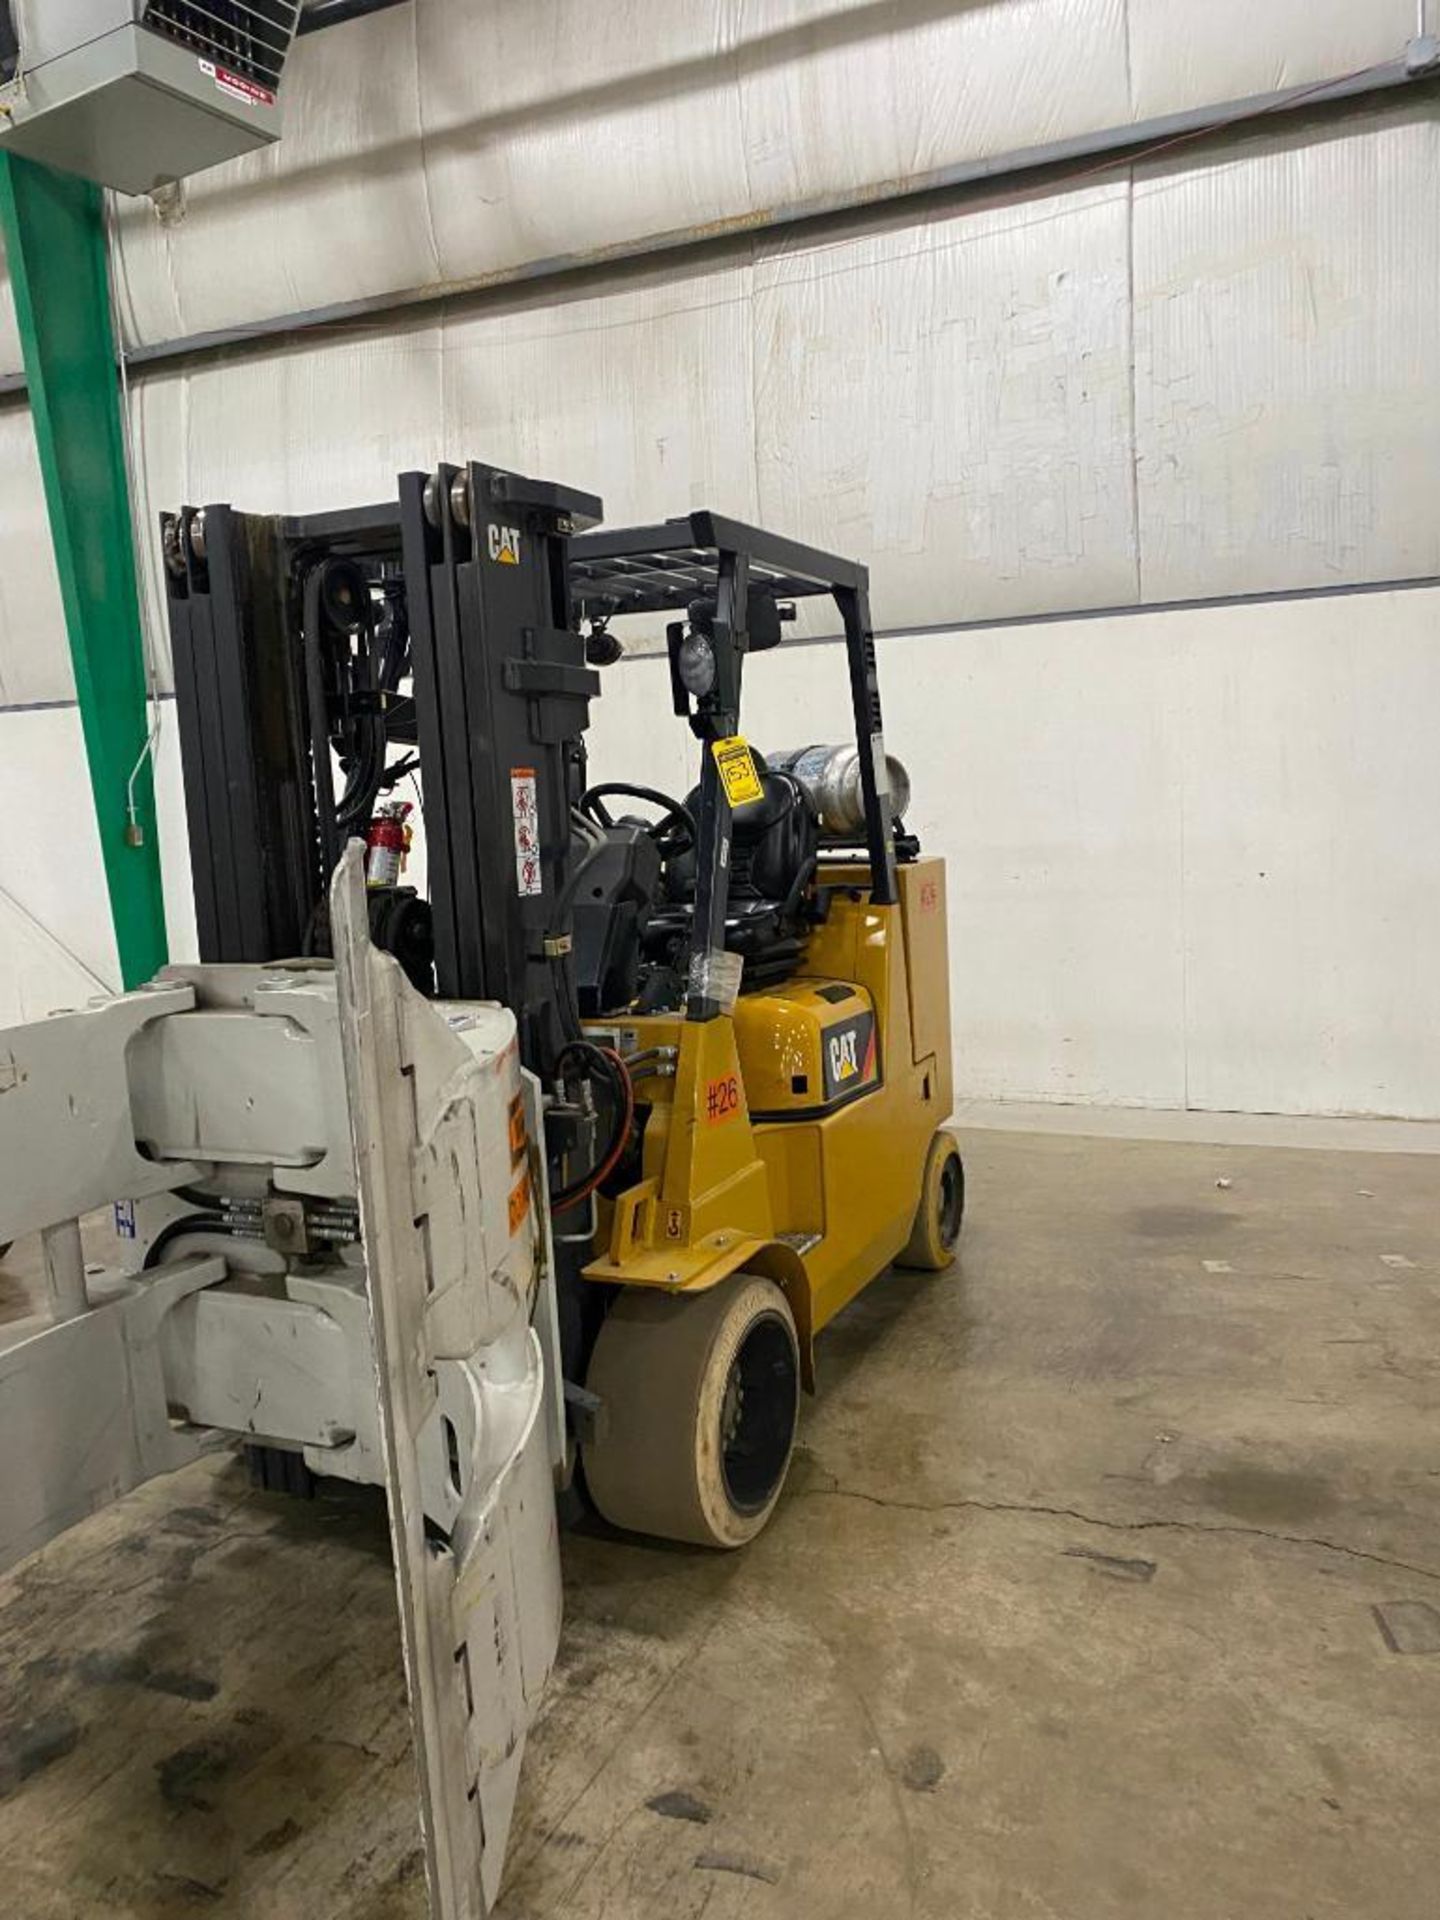 Caterpillar GC55K Forklift w/ Roll Clamp, S/N AT88B10163, 3-Stage Mast, Solid Non-Marking Tires, LP - Image 2 of 6